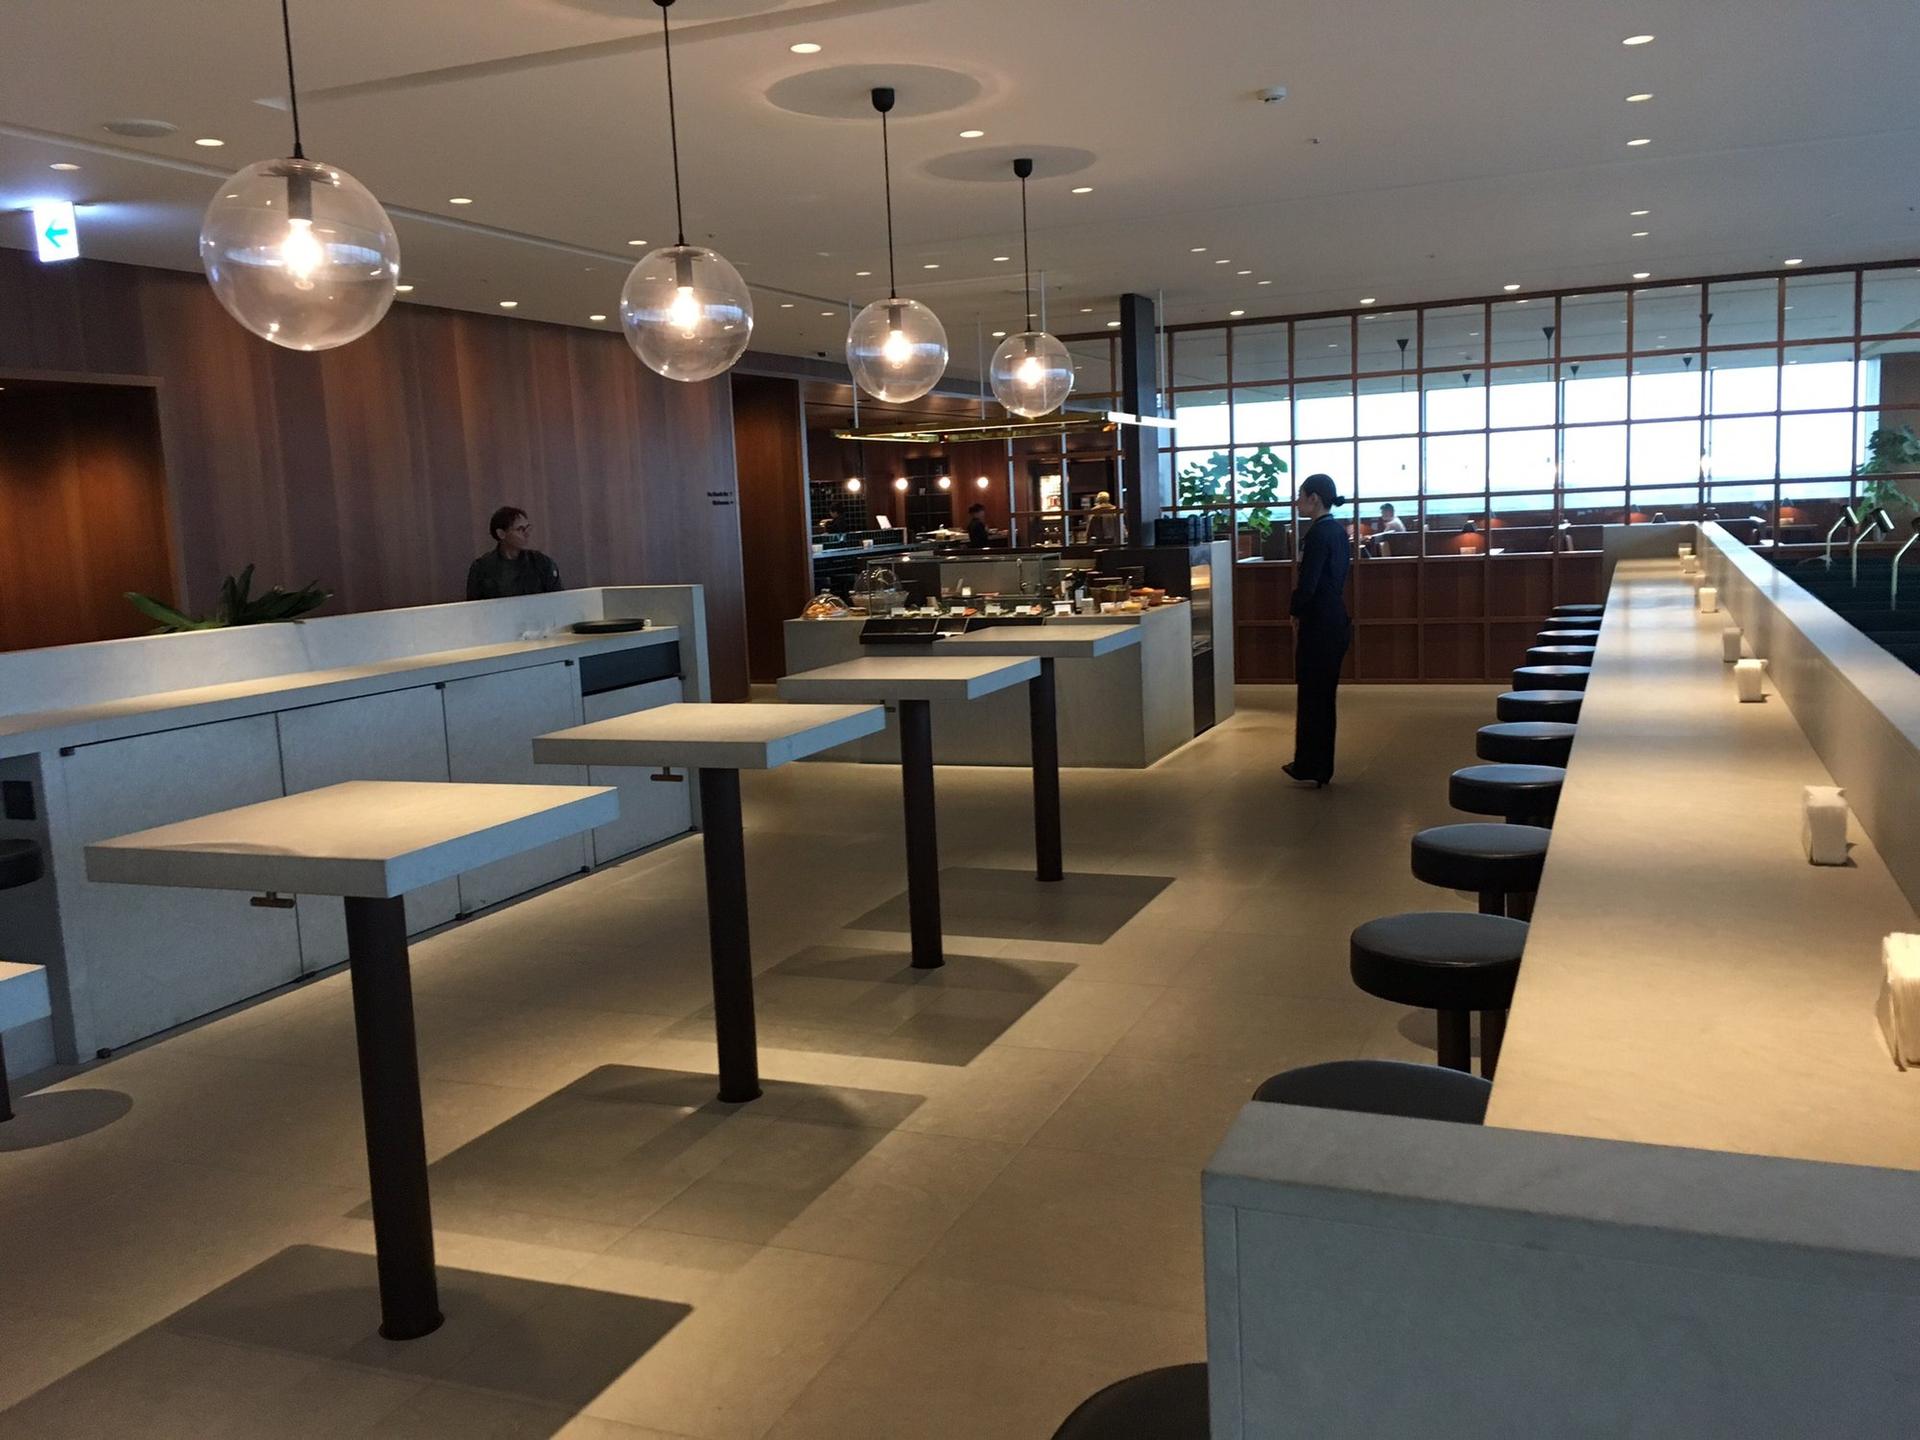 Cathay Pacific Lounge image 48 of 49